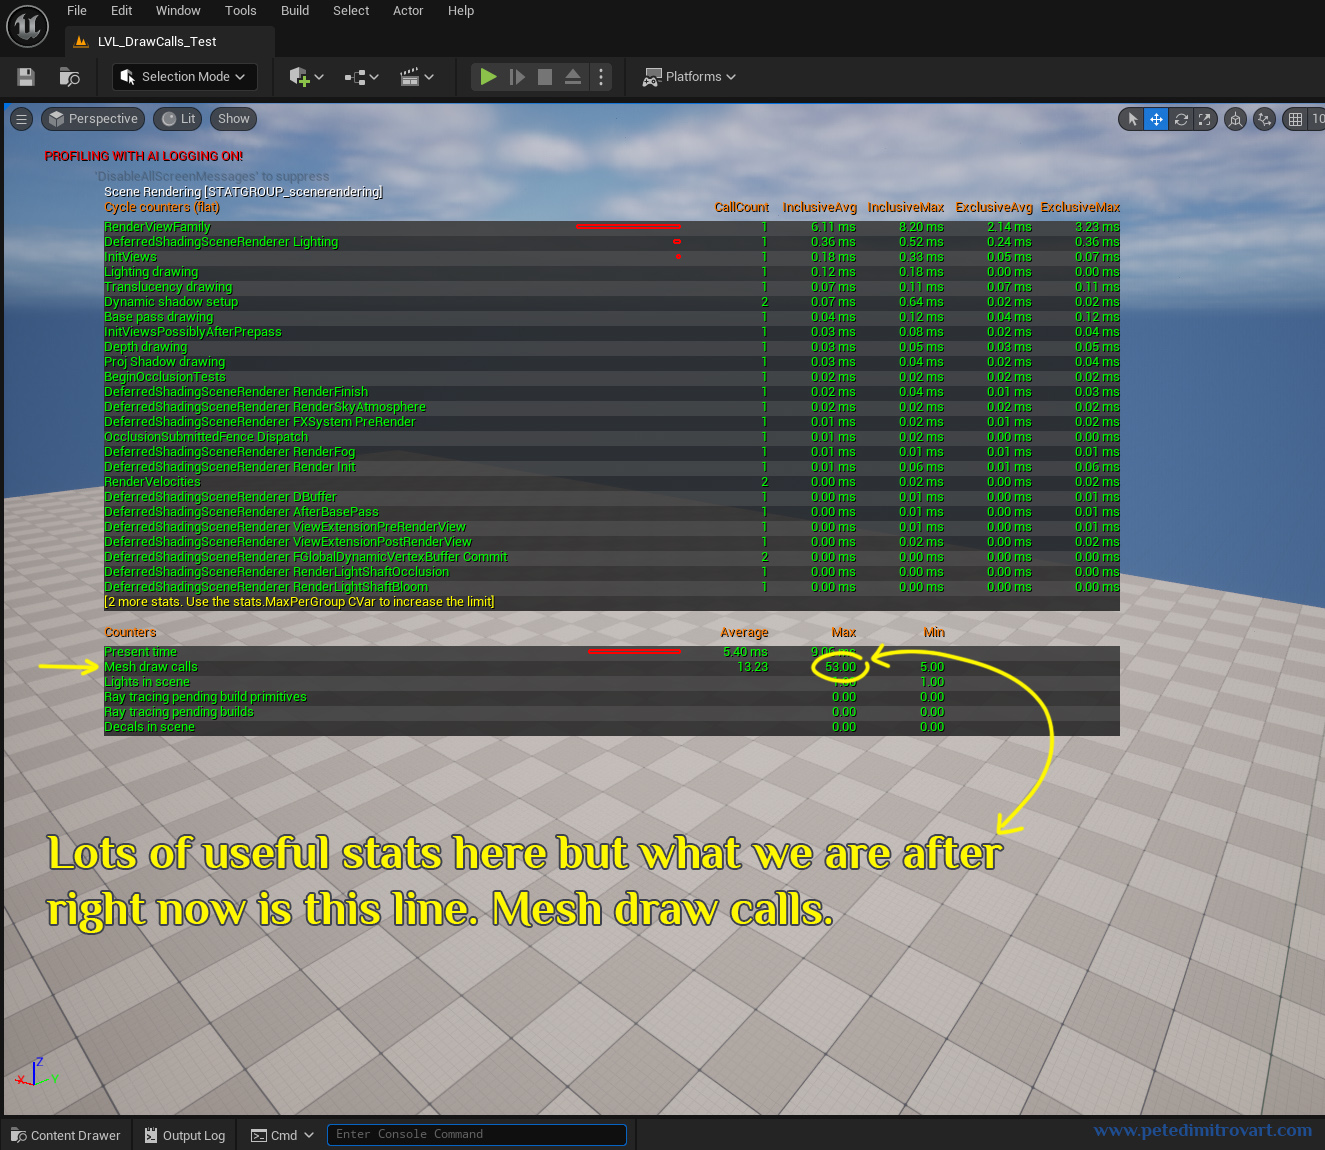 Screenshot of a screen identical to before (blank UE5 scene). This time, we’ve typed into the cmd and a profiling screen has popped up on top. Lots of green text describes different stats. By the bottom, in “Counters” under “Present time - 5.40ms” there is “Mesh draw calls - average 13.23 and max 53.00”. Orange arrow points to that and yellow text says “Lots of useful stats here but what we are after right now is this line. Mesh draw calls.”.